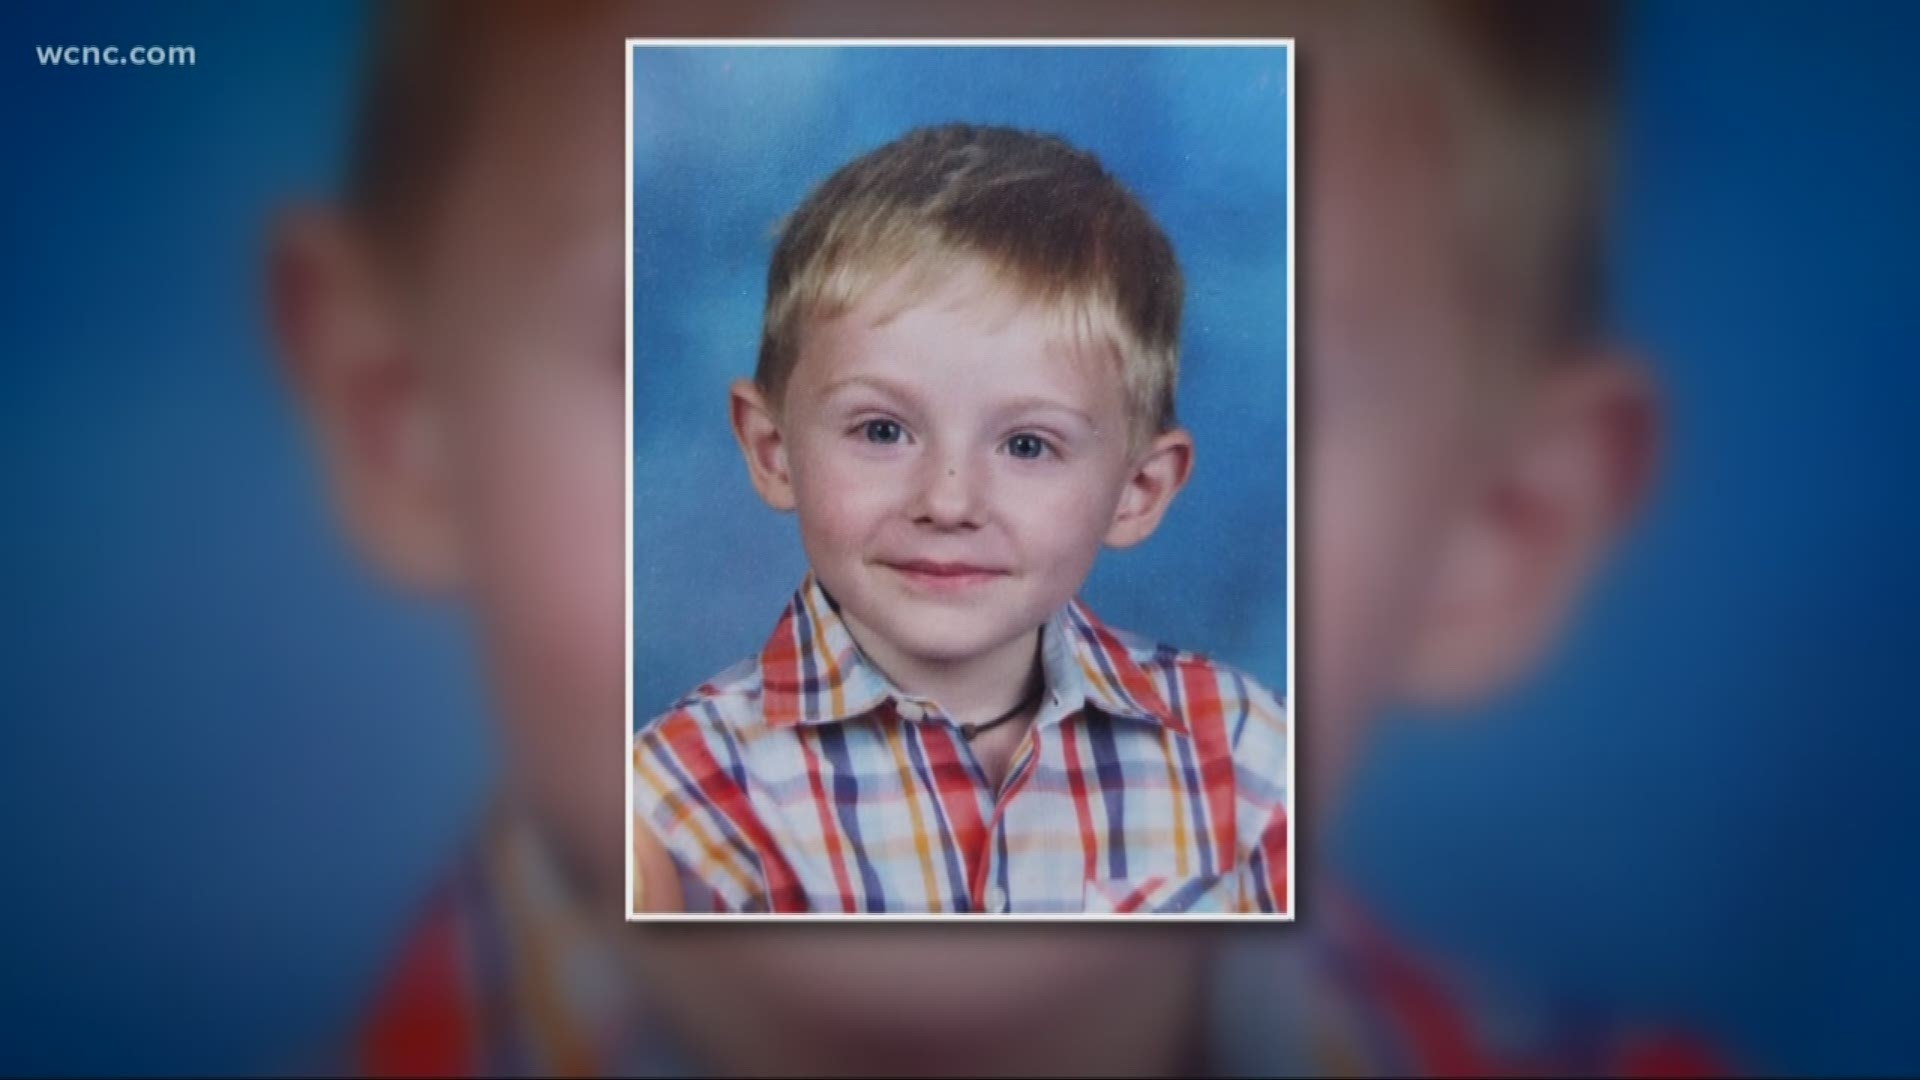 On Monday, autopsy results confirmed a body found in Gaston county was the six-year-old boy.